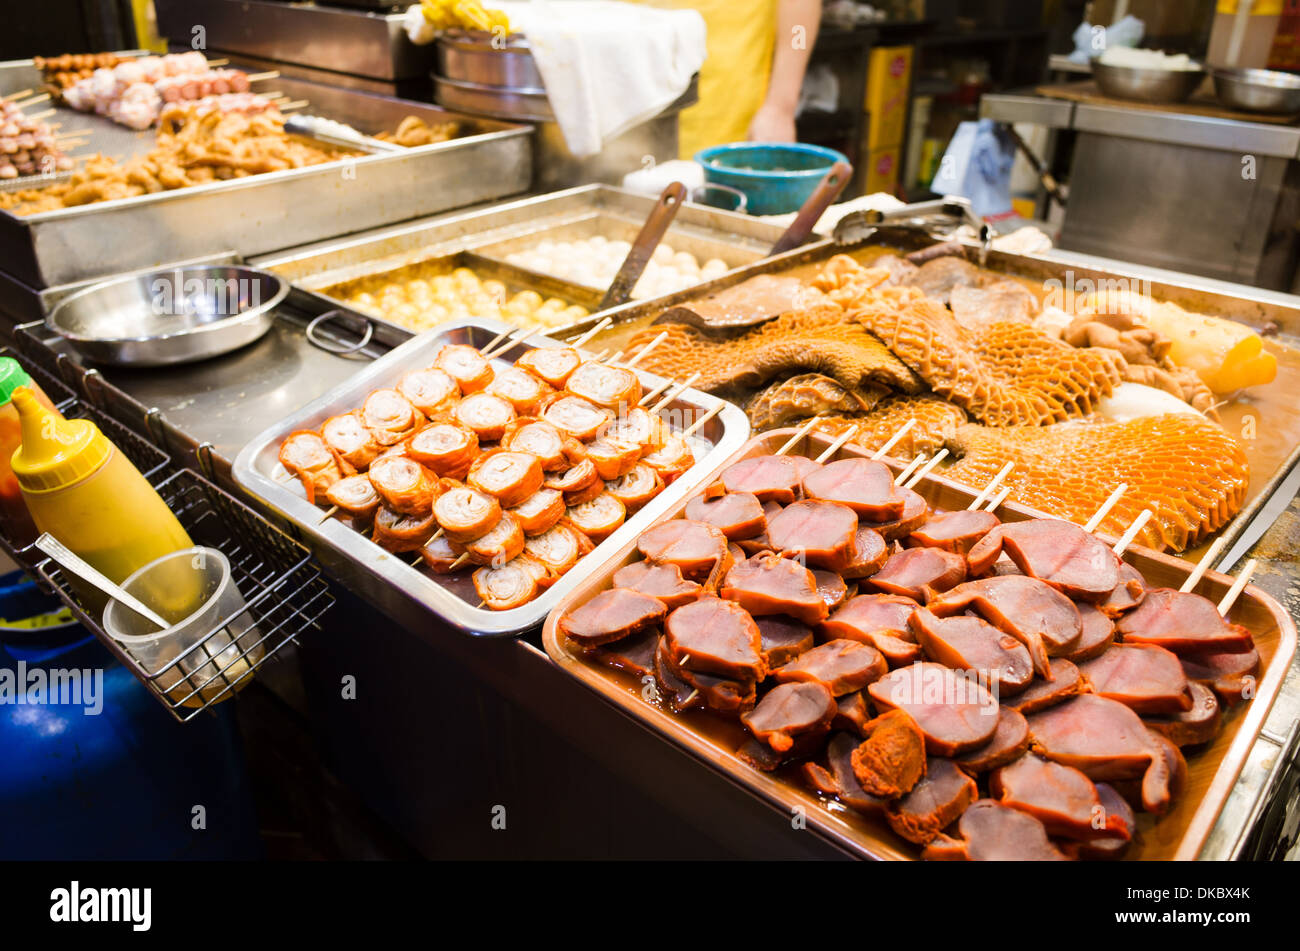 Hong kong street snack at night, with pork and stew beef. Stock Photo